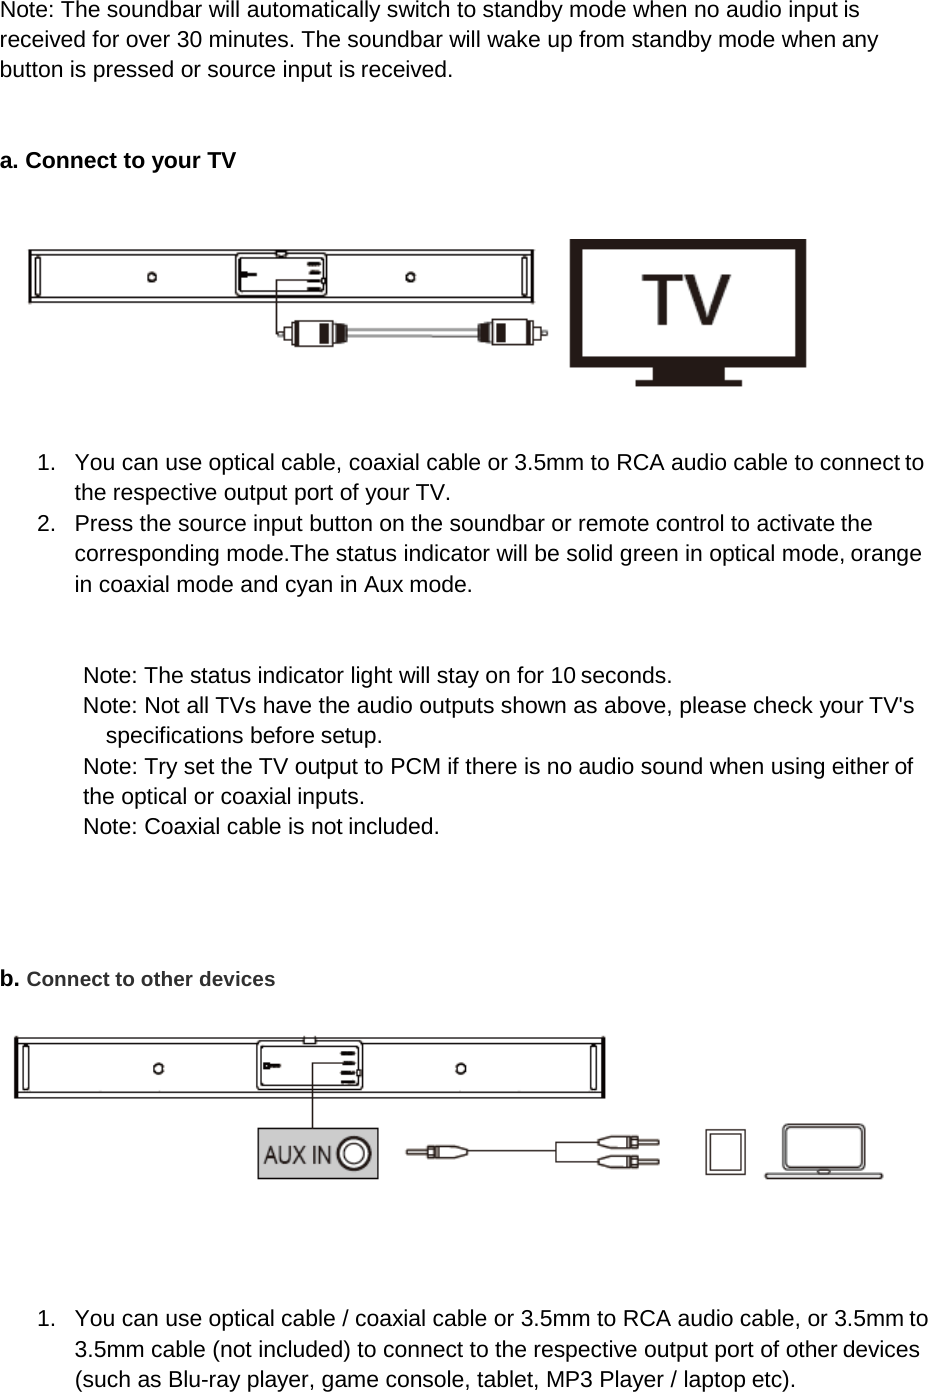 Note: The soundbar will automatically switch to standby mode when no audio input is received for over 30 minutes. The soundbar will wake up from standby mode when any button is pressed or source input is received.   a. Connect to your TV      1. You can use optical cable, coaxial cable or 3.5mm to RCA audio cable to connect to the respective output port of your TV. 2. Press the source input button on the soundbar or remote control to activate the corresponding mode.The status indicator will be solid green in optical mode, orange in coaxial mode and cyan in Aux mode.   Note: The status indicator light will stay on for 10 seconds. Note: Not all TVs have the audio outputs shown as above, please check your TV&apos;s specifications before setup. Note: Try set the TV output to PCM if there is no audio sound when using either of the optical or coaxial inputs. Note: Coaxial cable is not included.     b. Connect to other devices      1. You can use optical cable / coaxial cable or 3.5mm to RCA audio cable, or 3.5mm to 3.5mm cable (not included) to connect to the respective output port of other devices (such as Blu-ray player, game console, tablet, MP3 Player / laptop etc). 